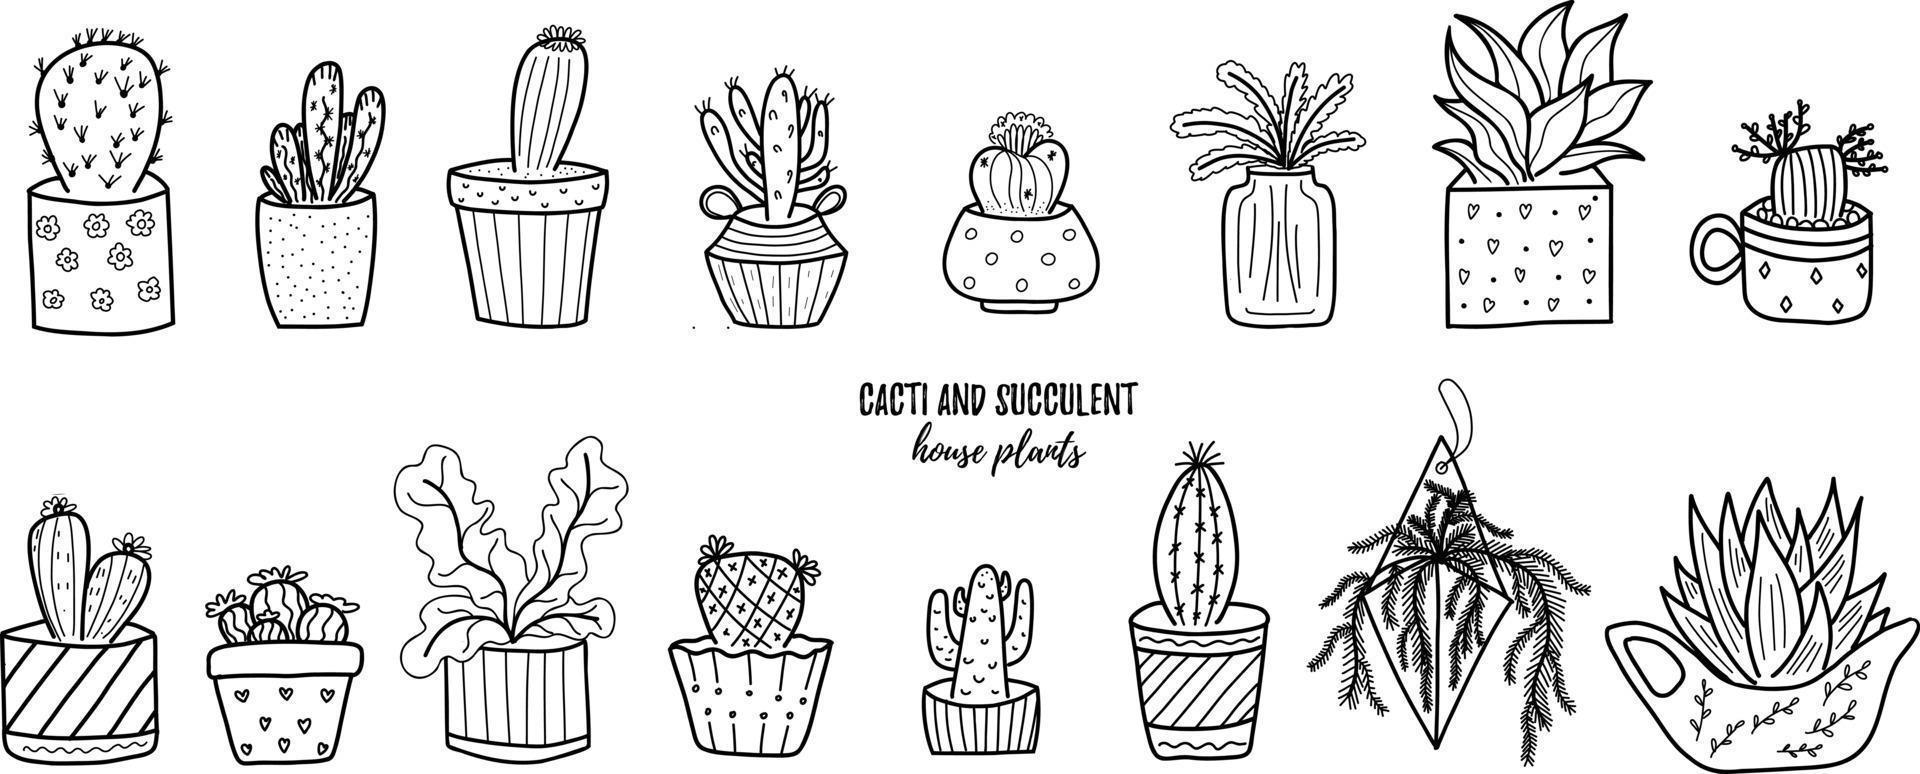 Vector doodle cactus and succulent collection of illustration. Black line art house plants in a pots set. Great for different kind of designs and backgrounds